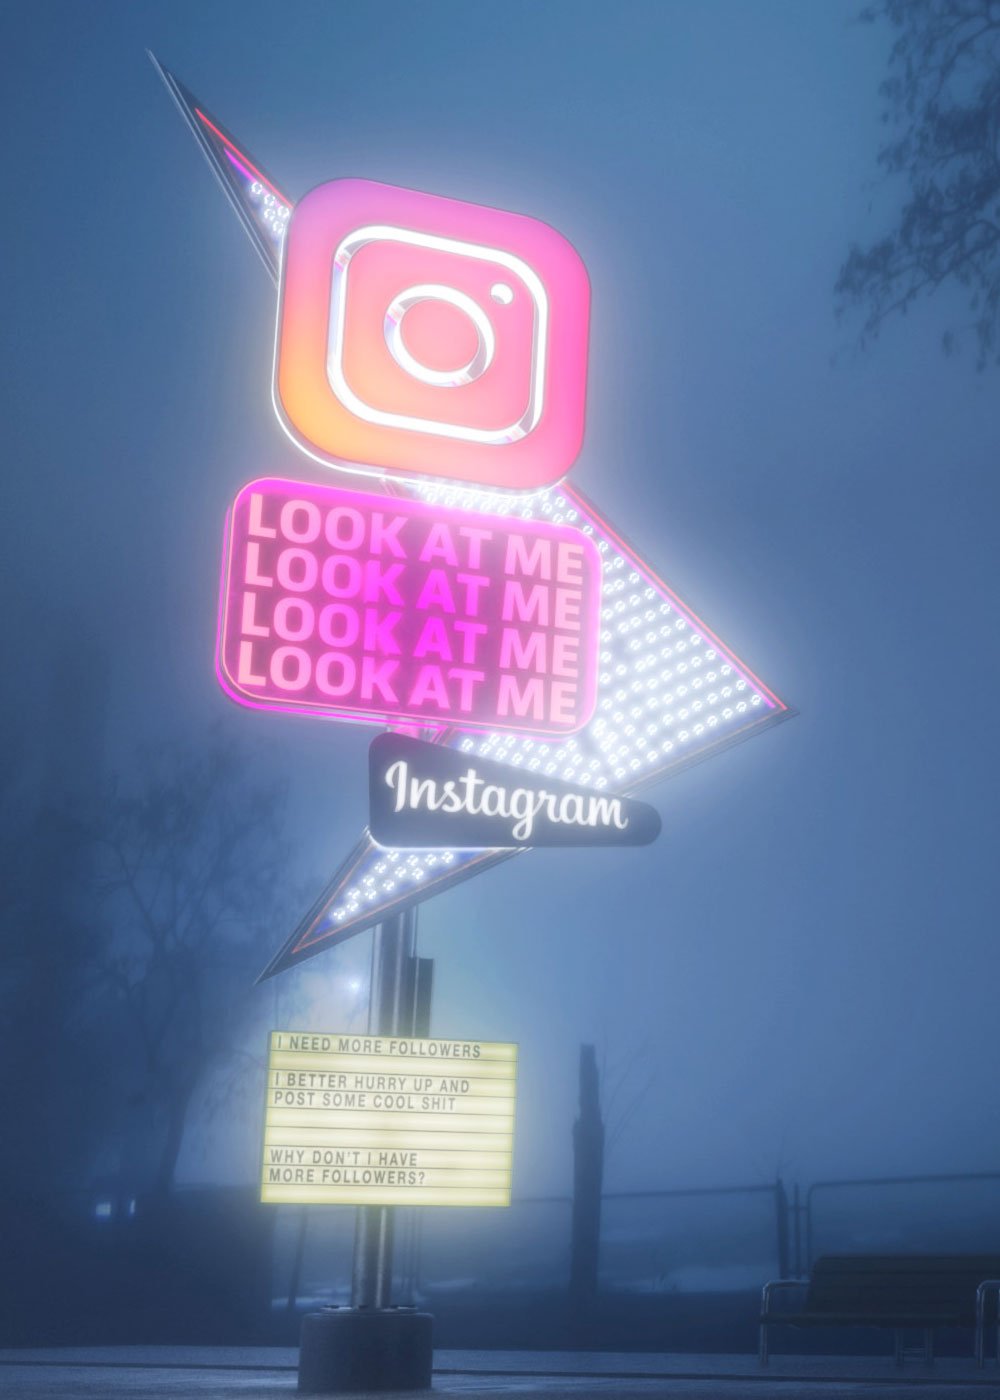 Instagram funny street sign, close up